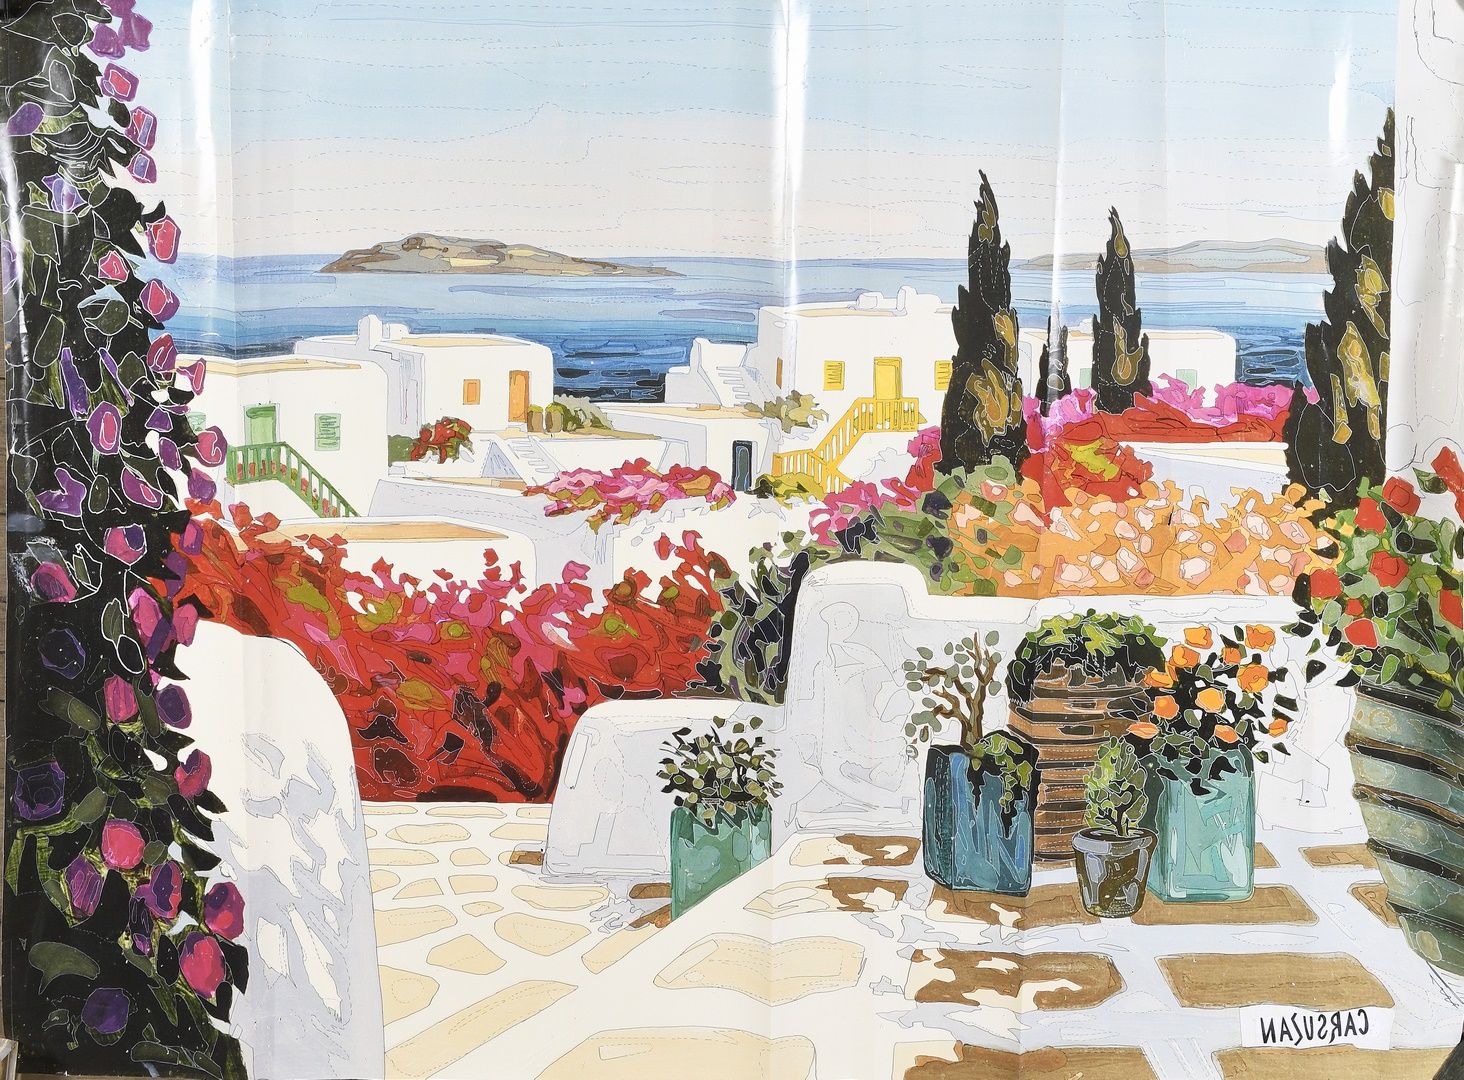 Null CARSUZAN
Terrace in Mykonos
Carton for the Aubusson tapestry, Jacques Fadat&hellip;